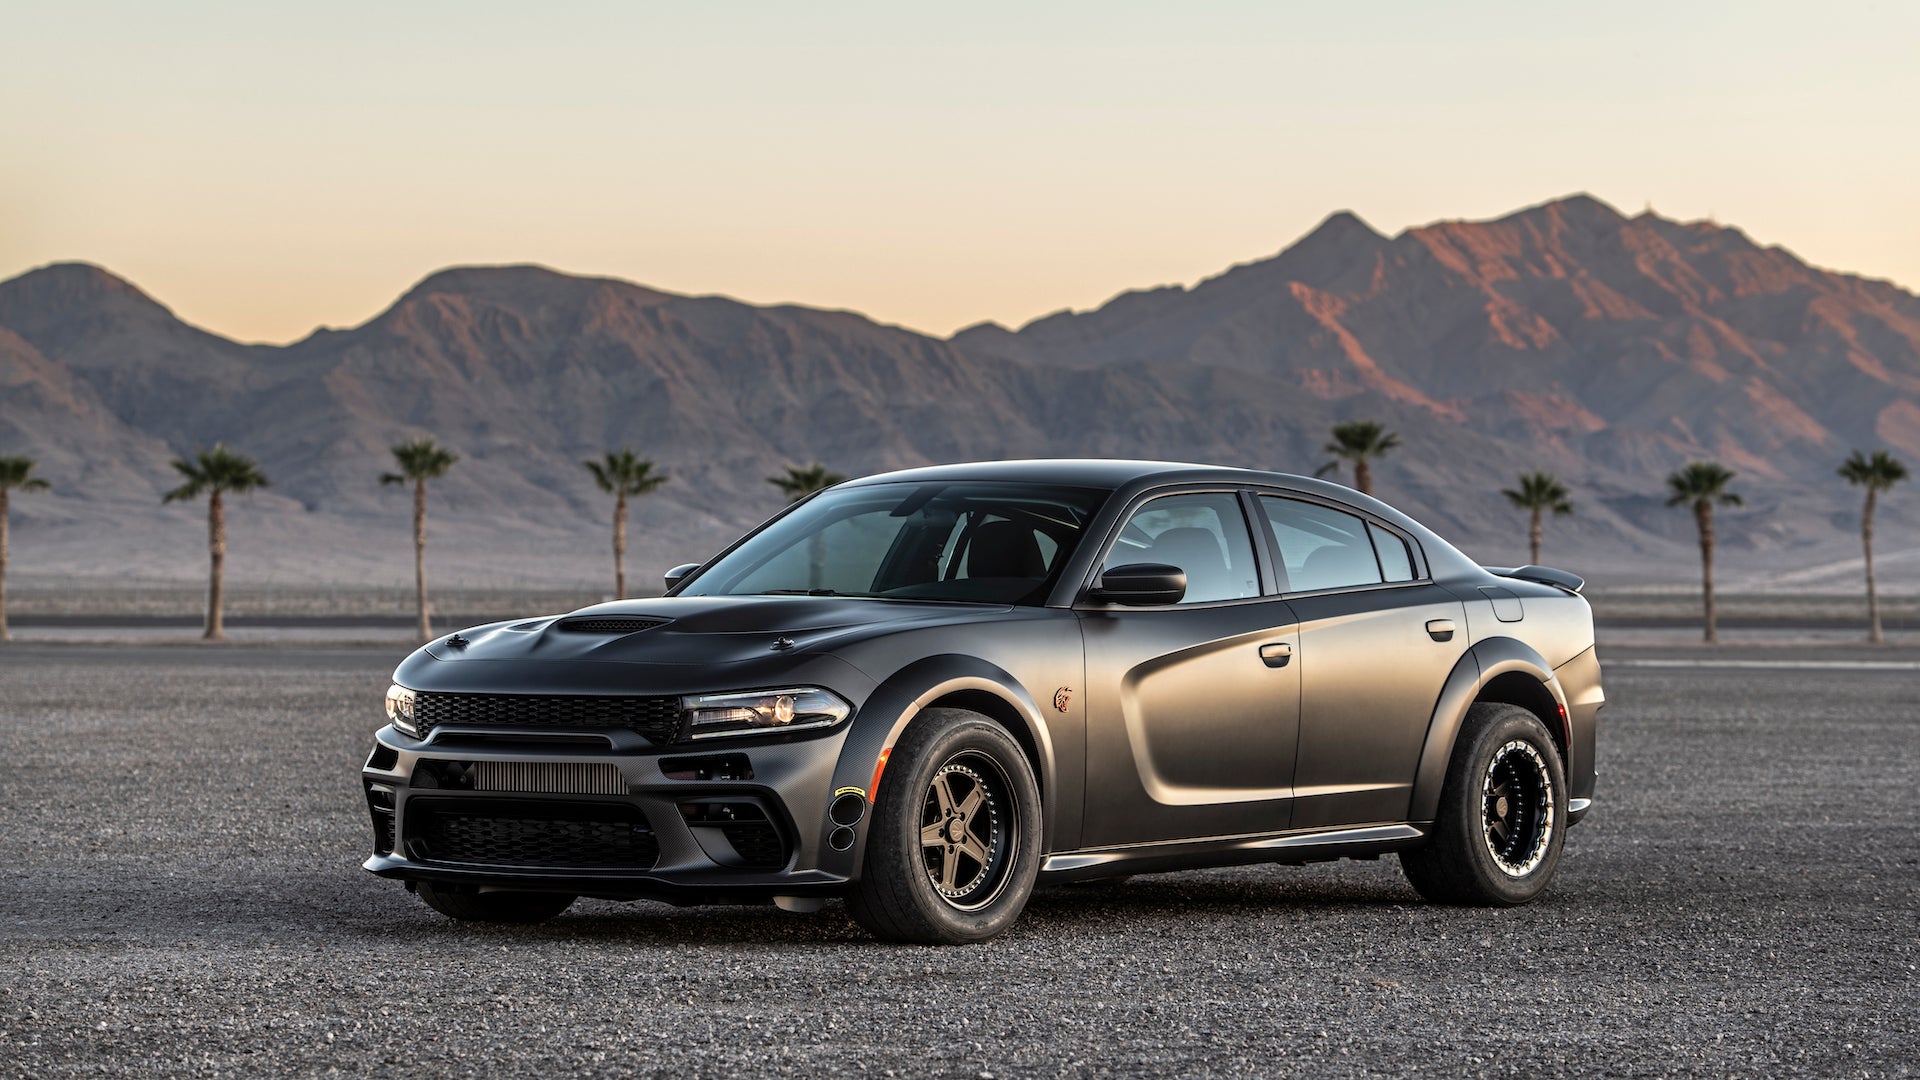 This Demon Swapped, 525 HP AWD Dodge Charger Widebody Was Built As A Birthday Gift